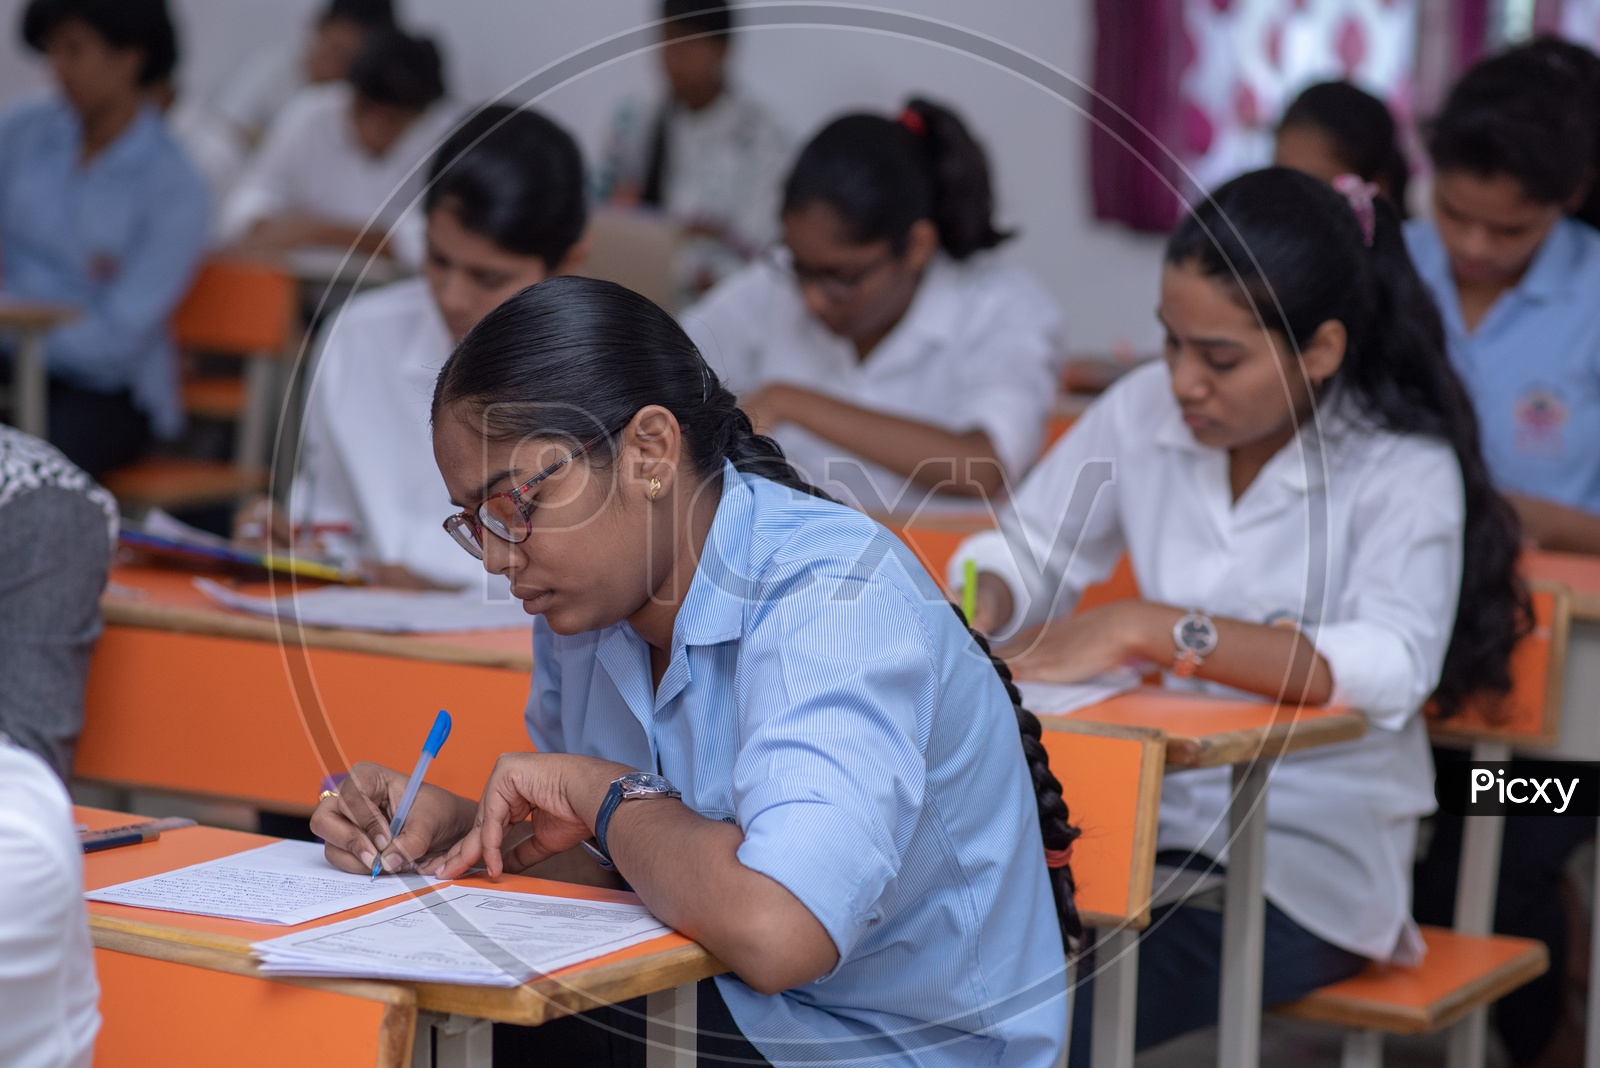 Students writing exams at an educational institute in India